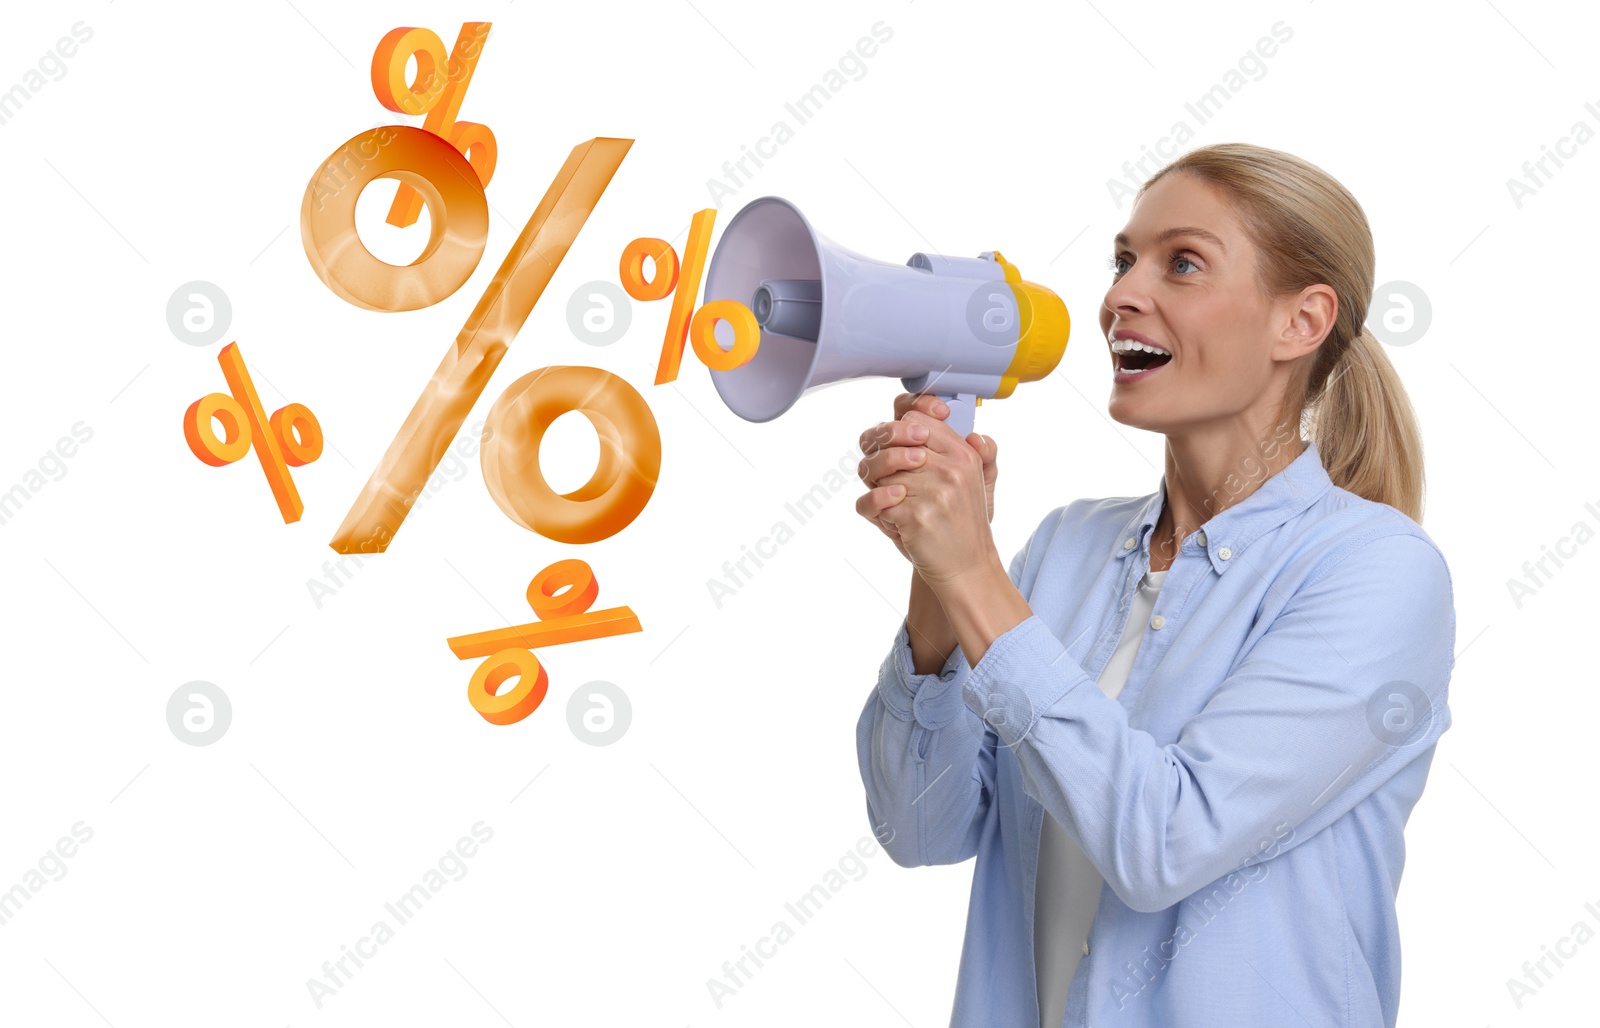 Image of Discount offer. Woman shouting into megaphone on white background. Percent signs coming out from device